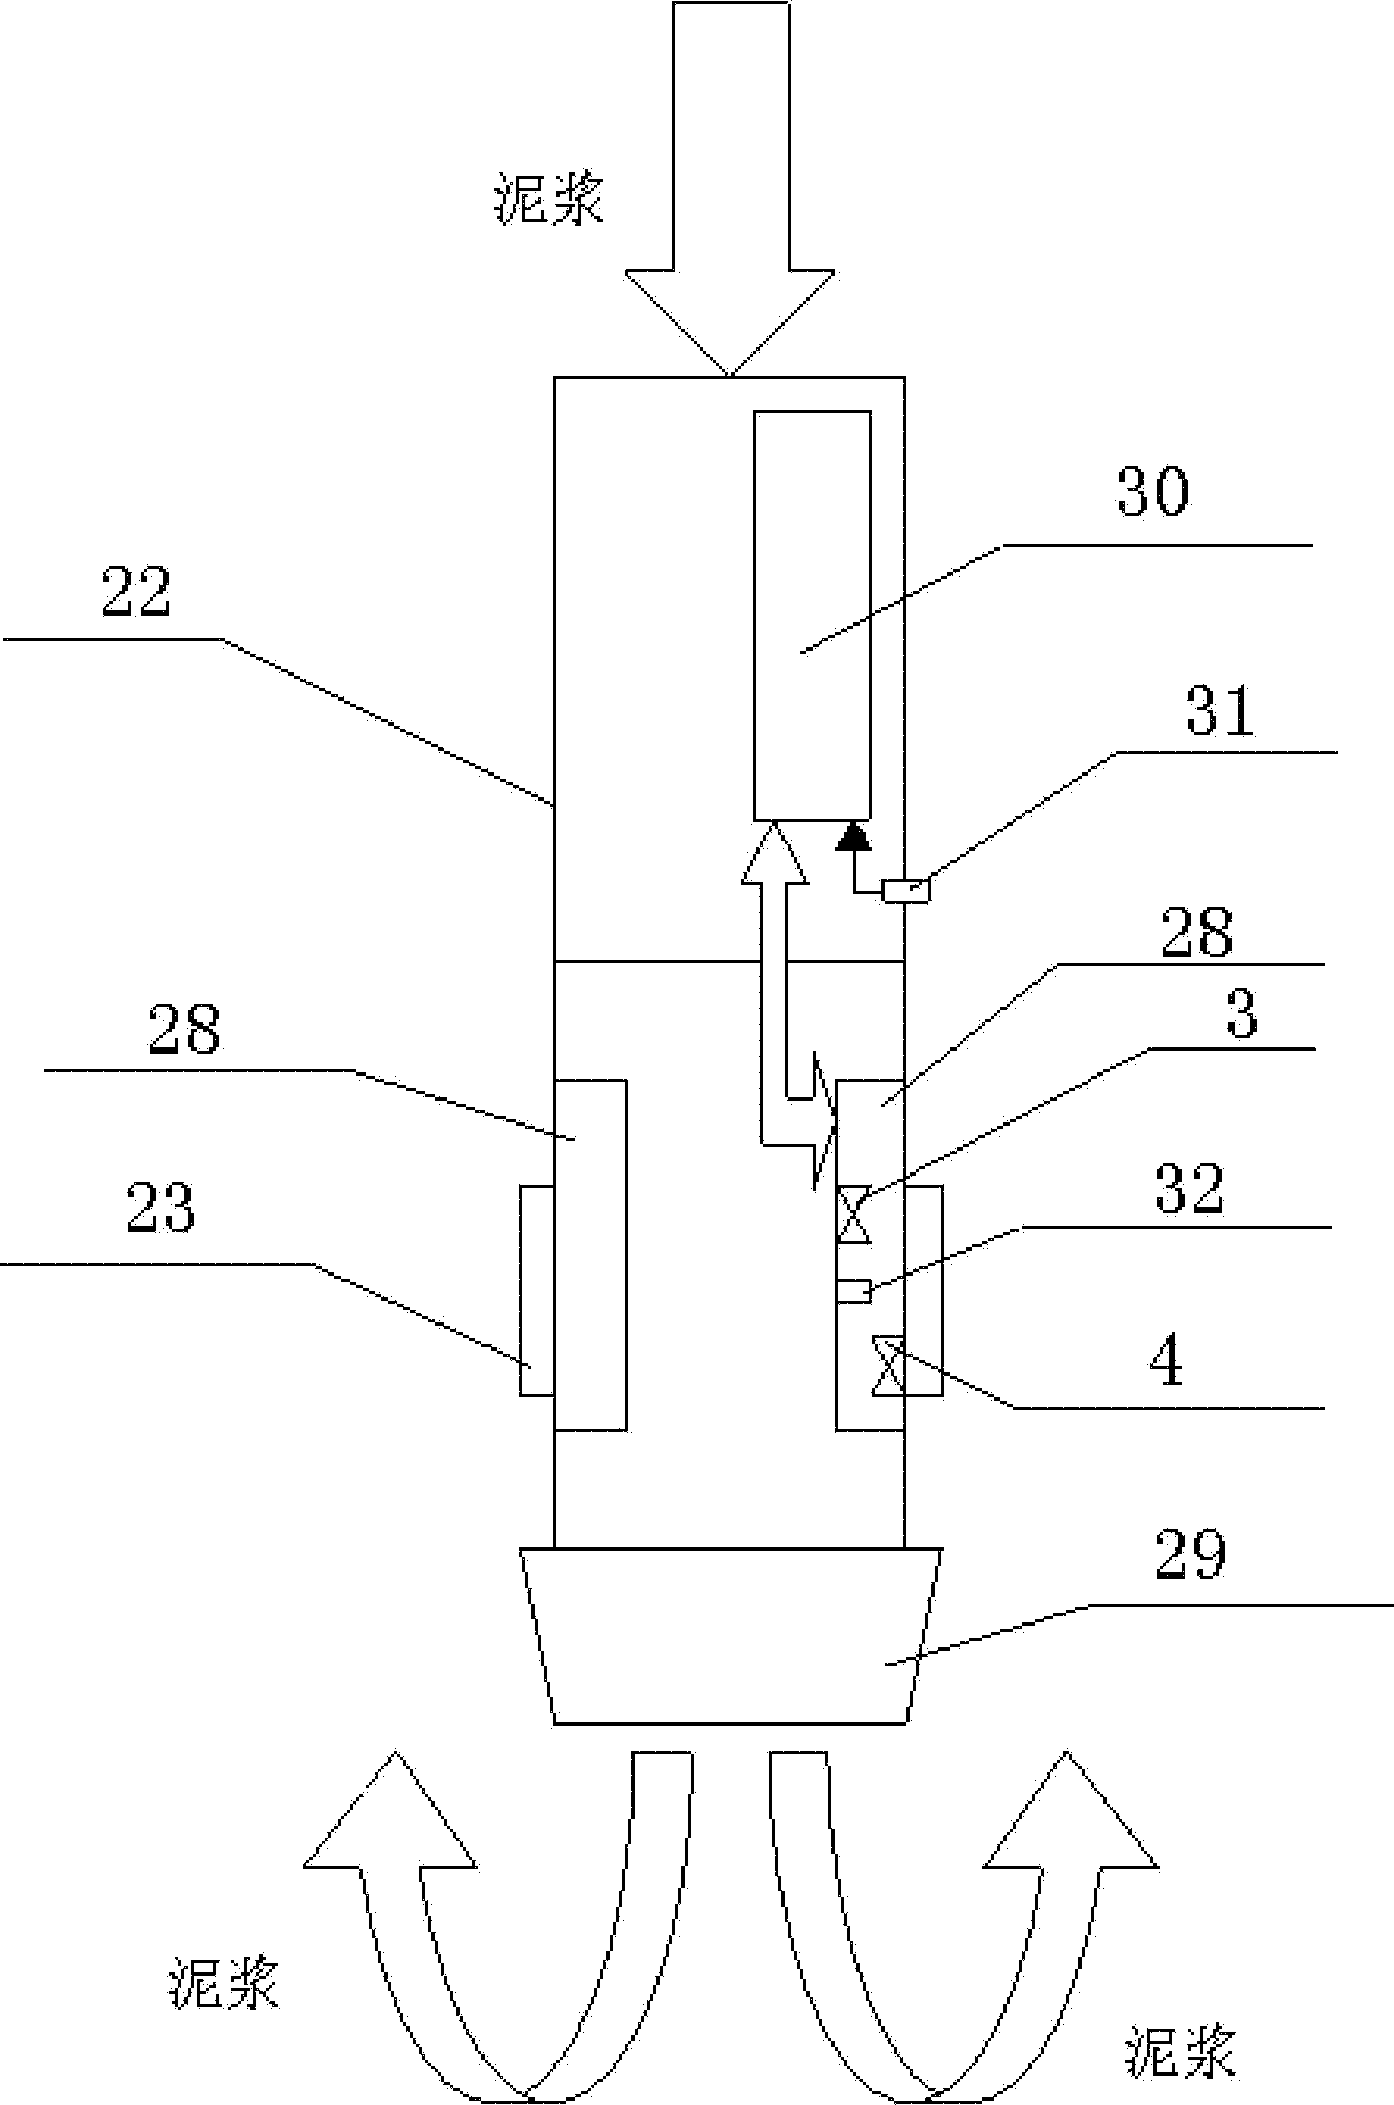 Slurry power bidirectional control hydraulic system for drilling and operation method thereof